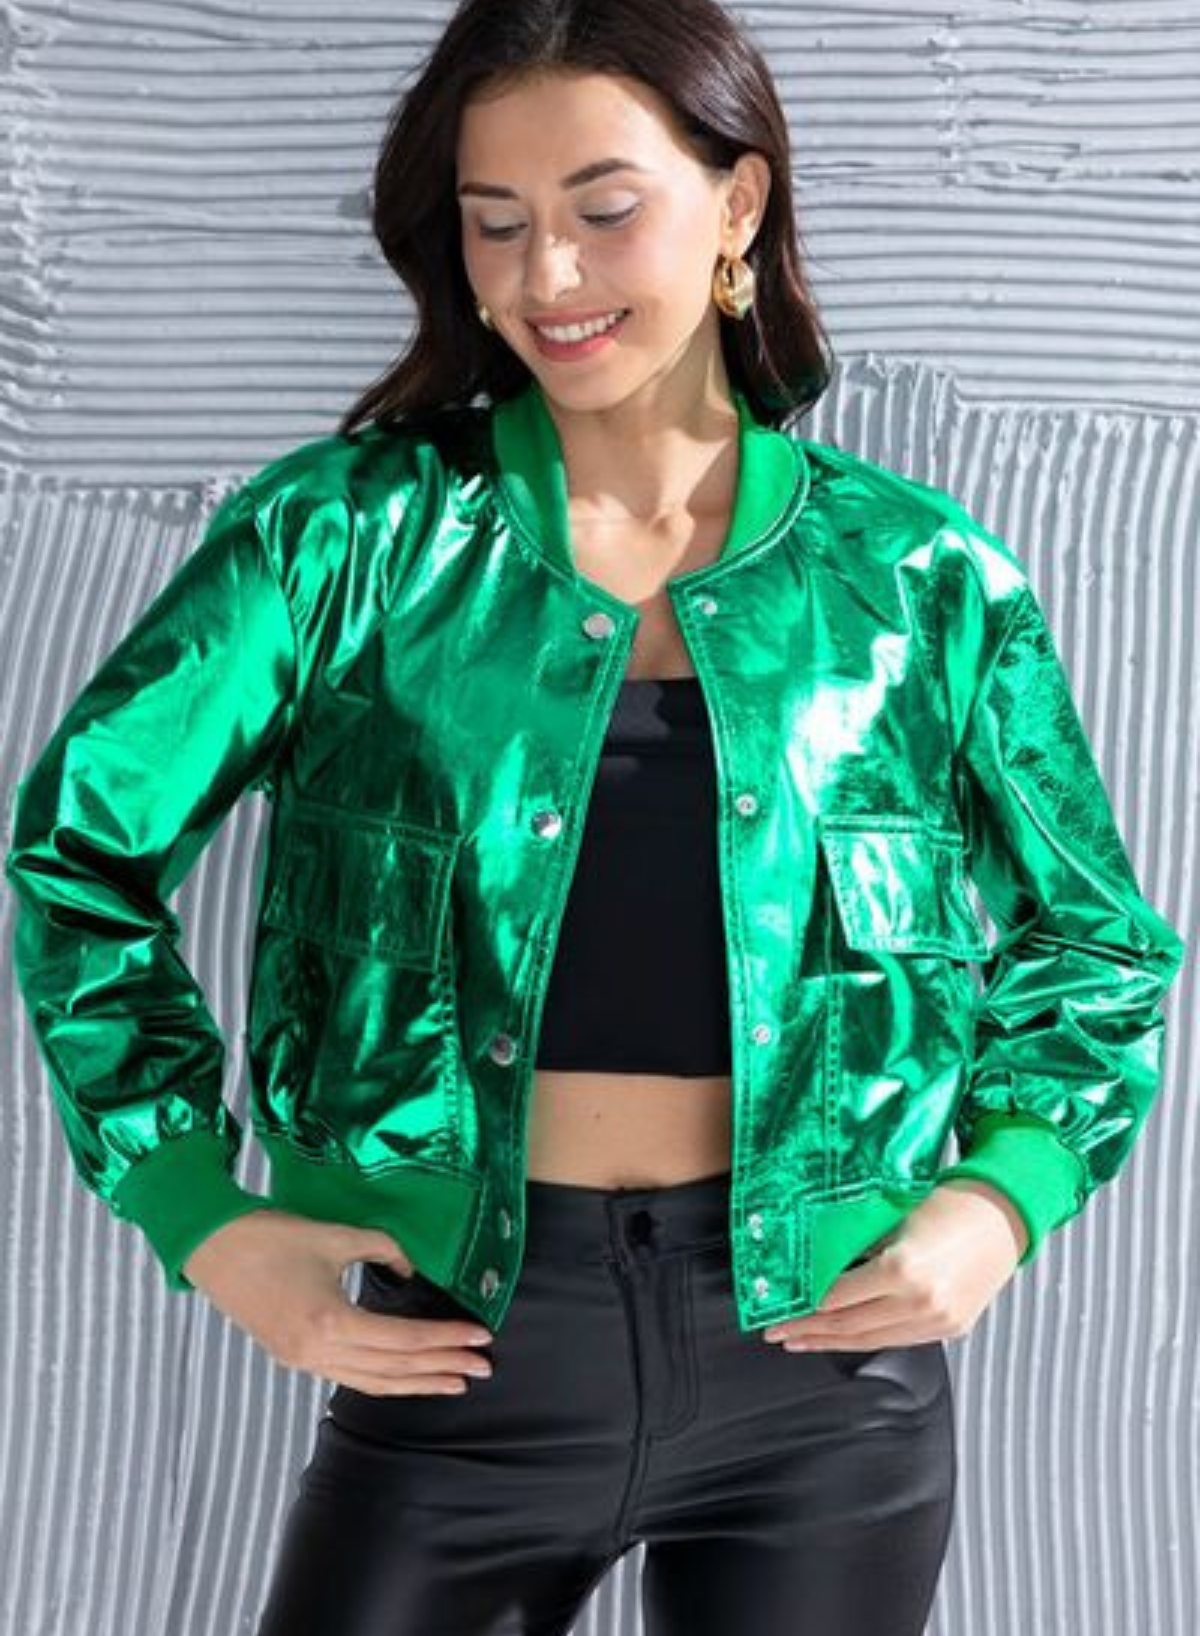 Gleam and Glam Snap Chic Jacket